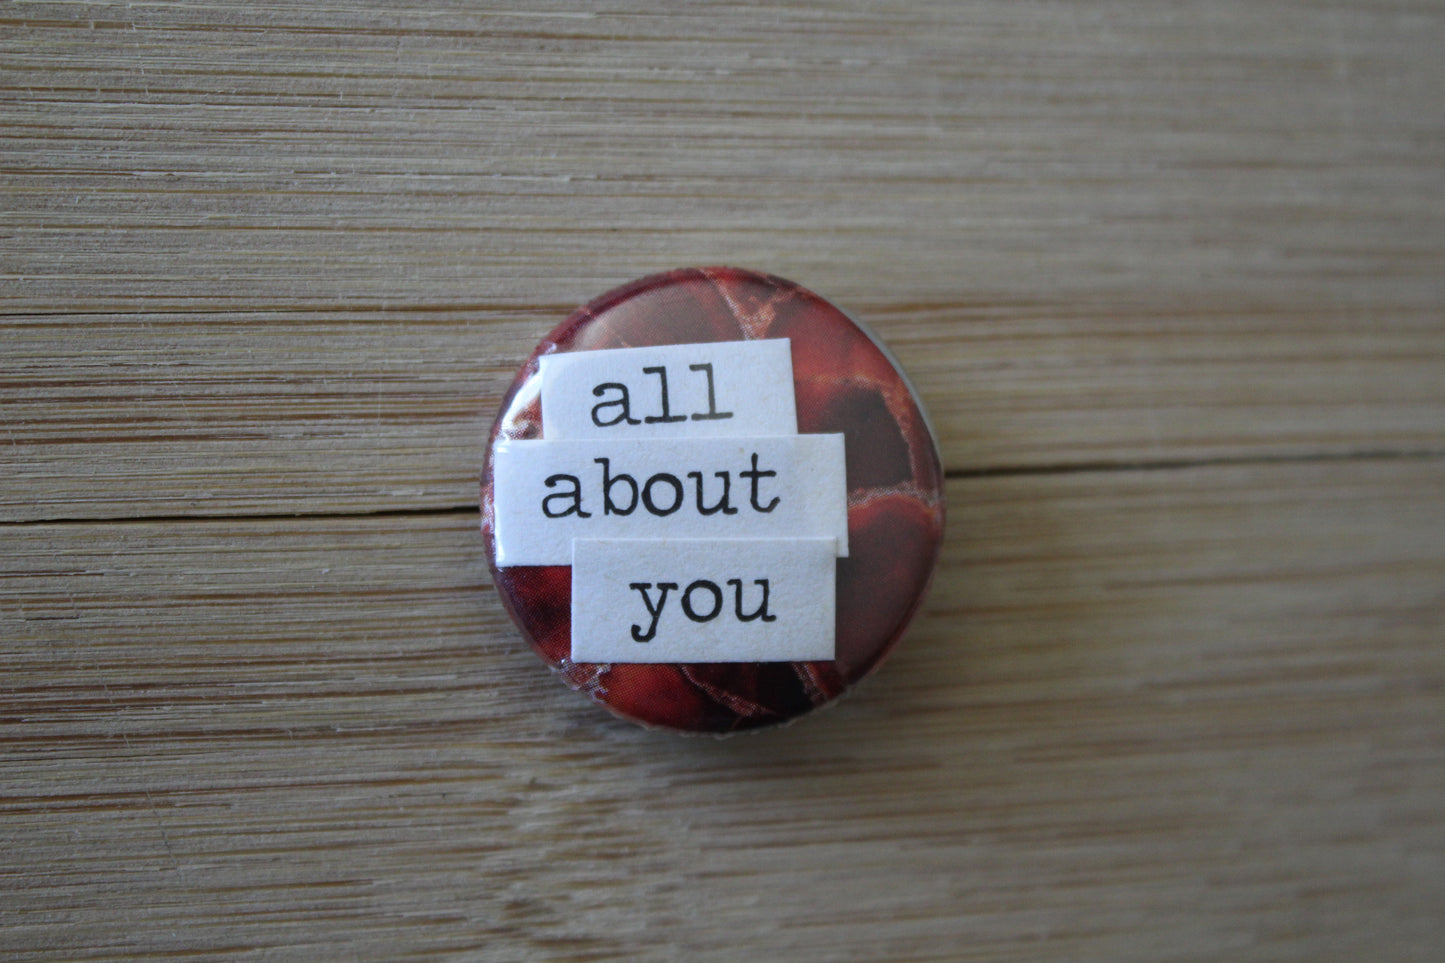 Button - All About You